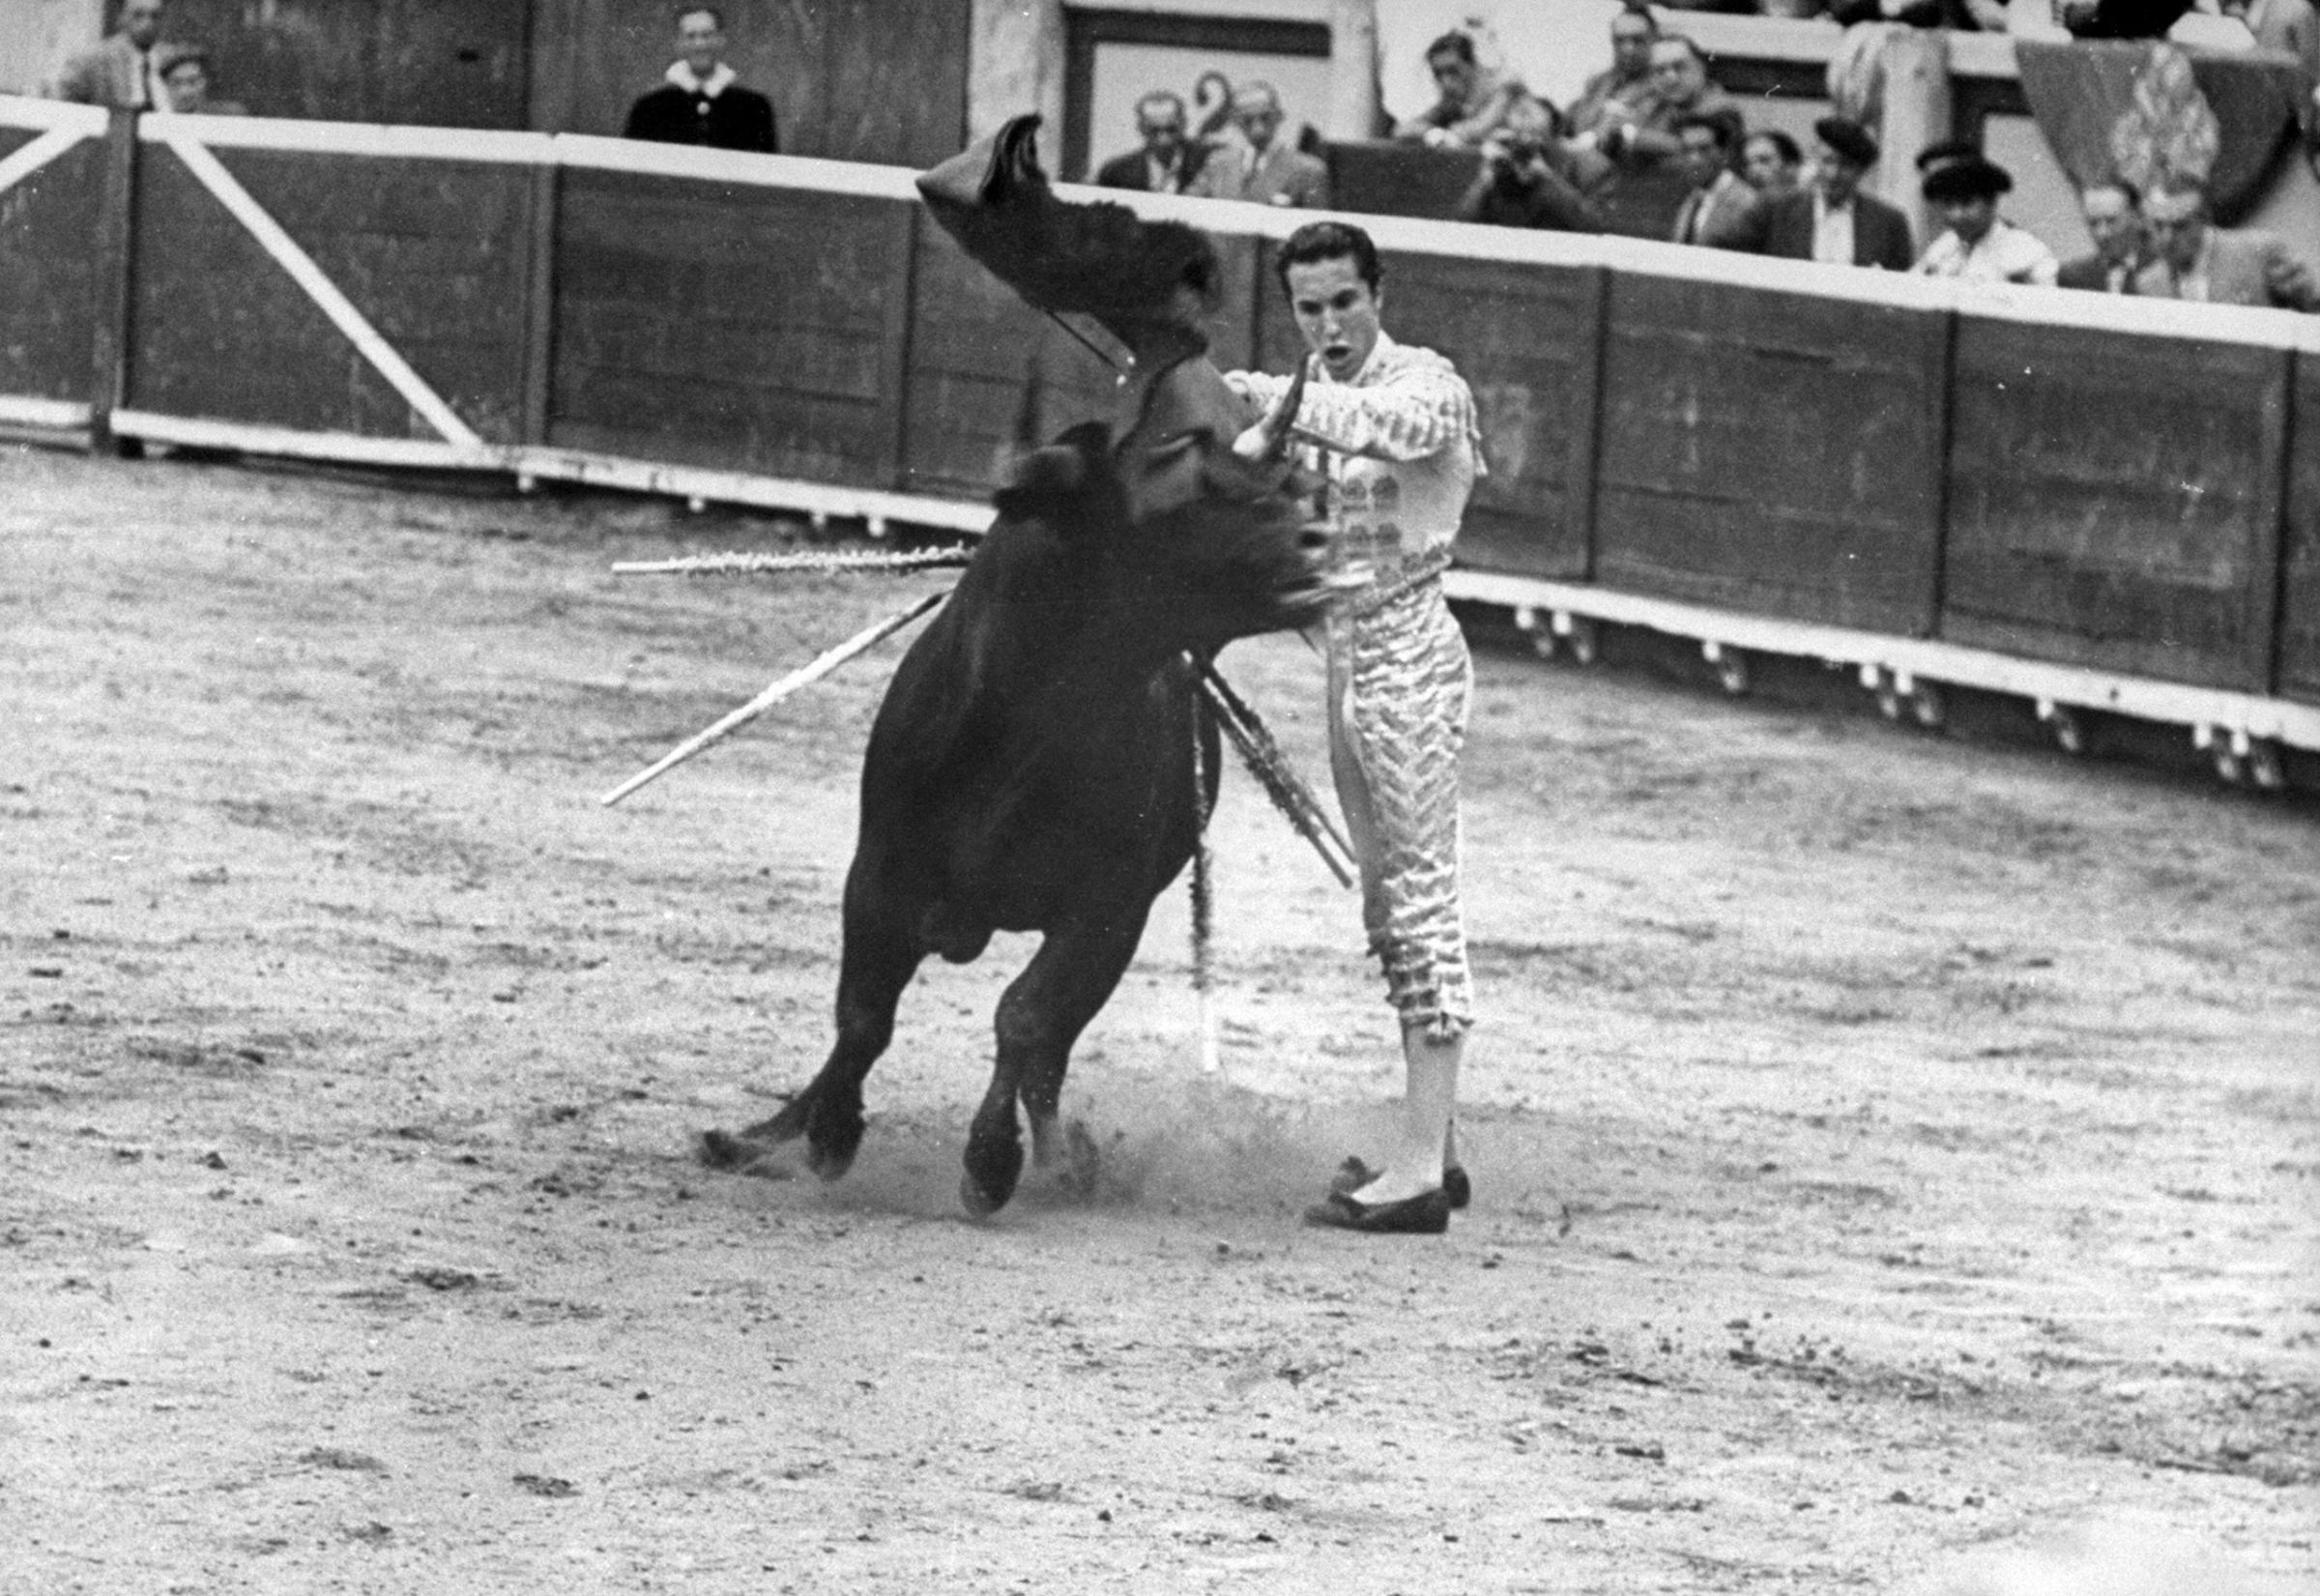 Matador Julian Marin and bull in the ring for a bullfight during the festival of San Fermín.